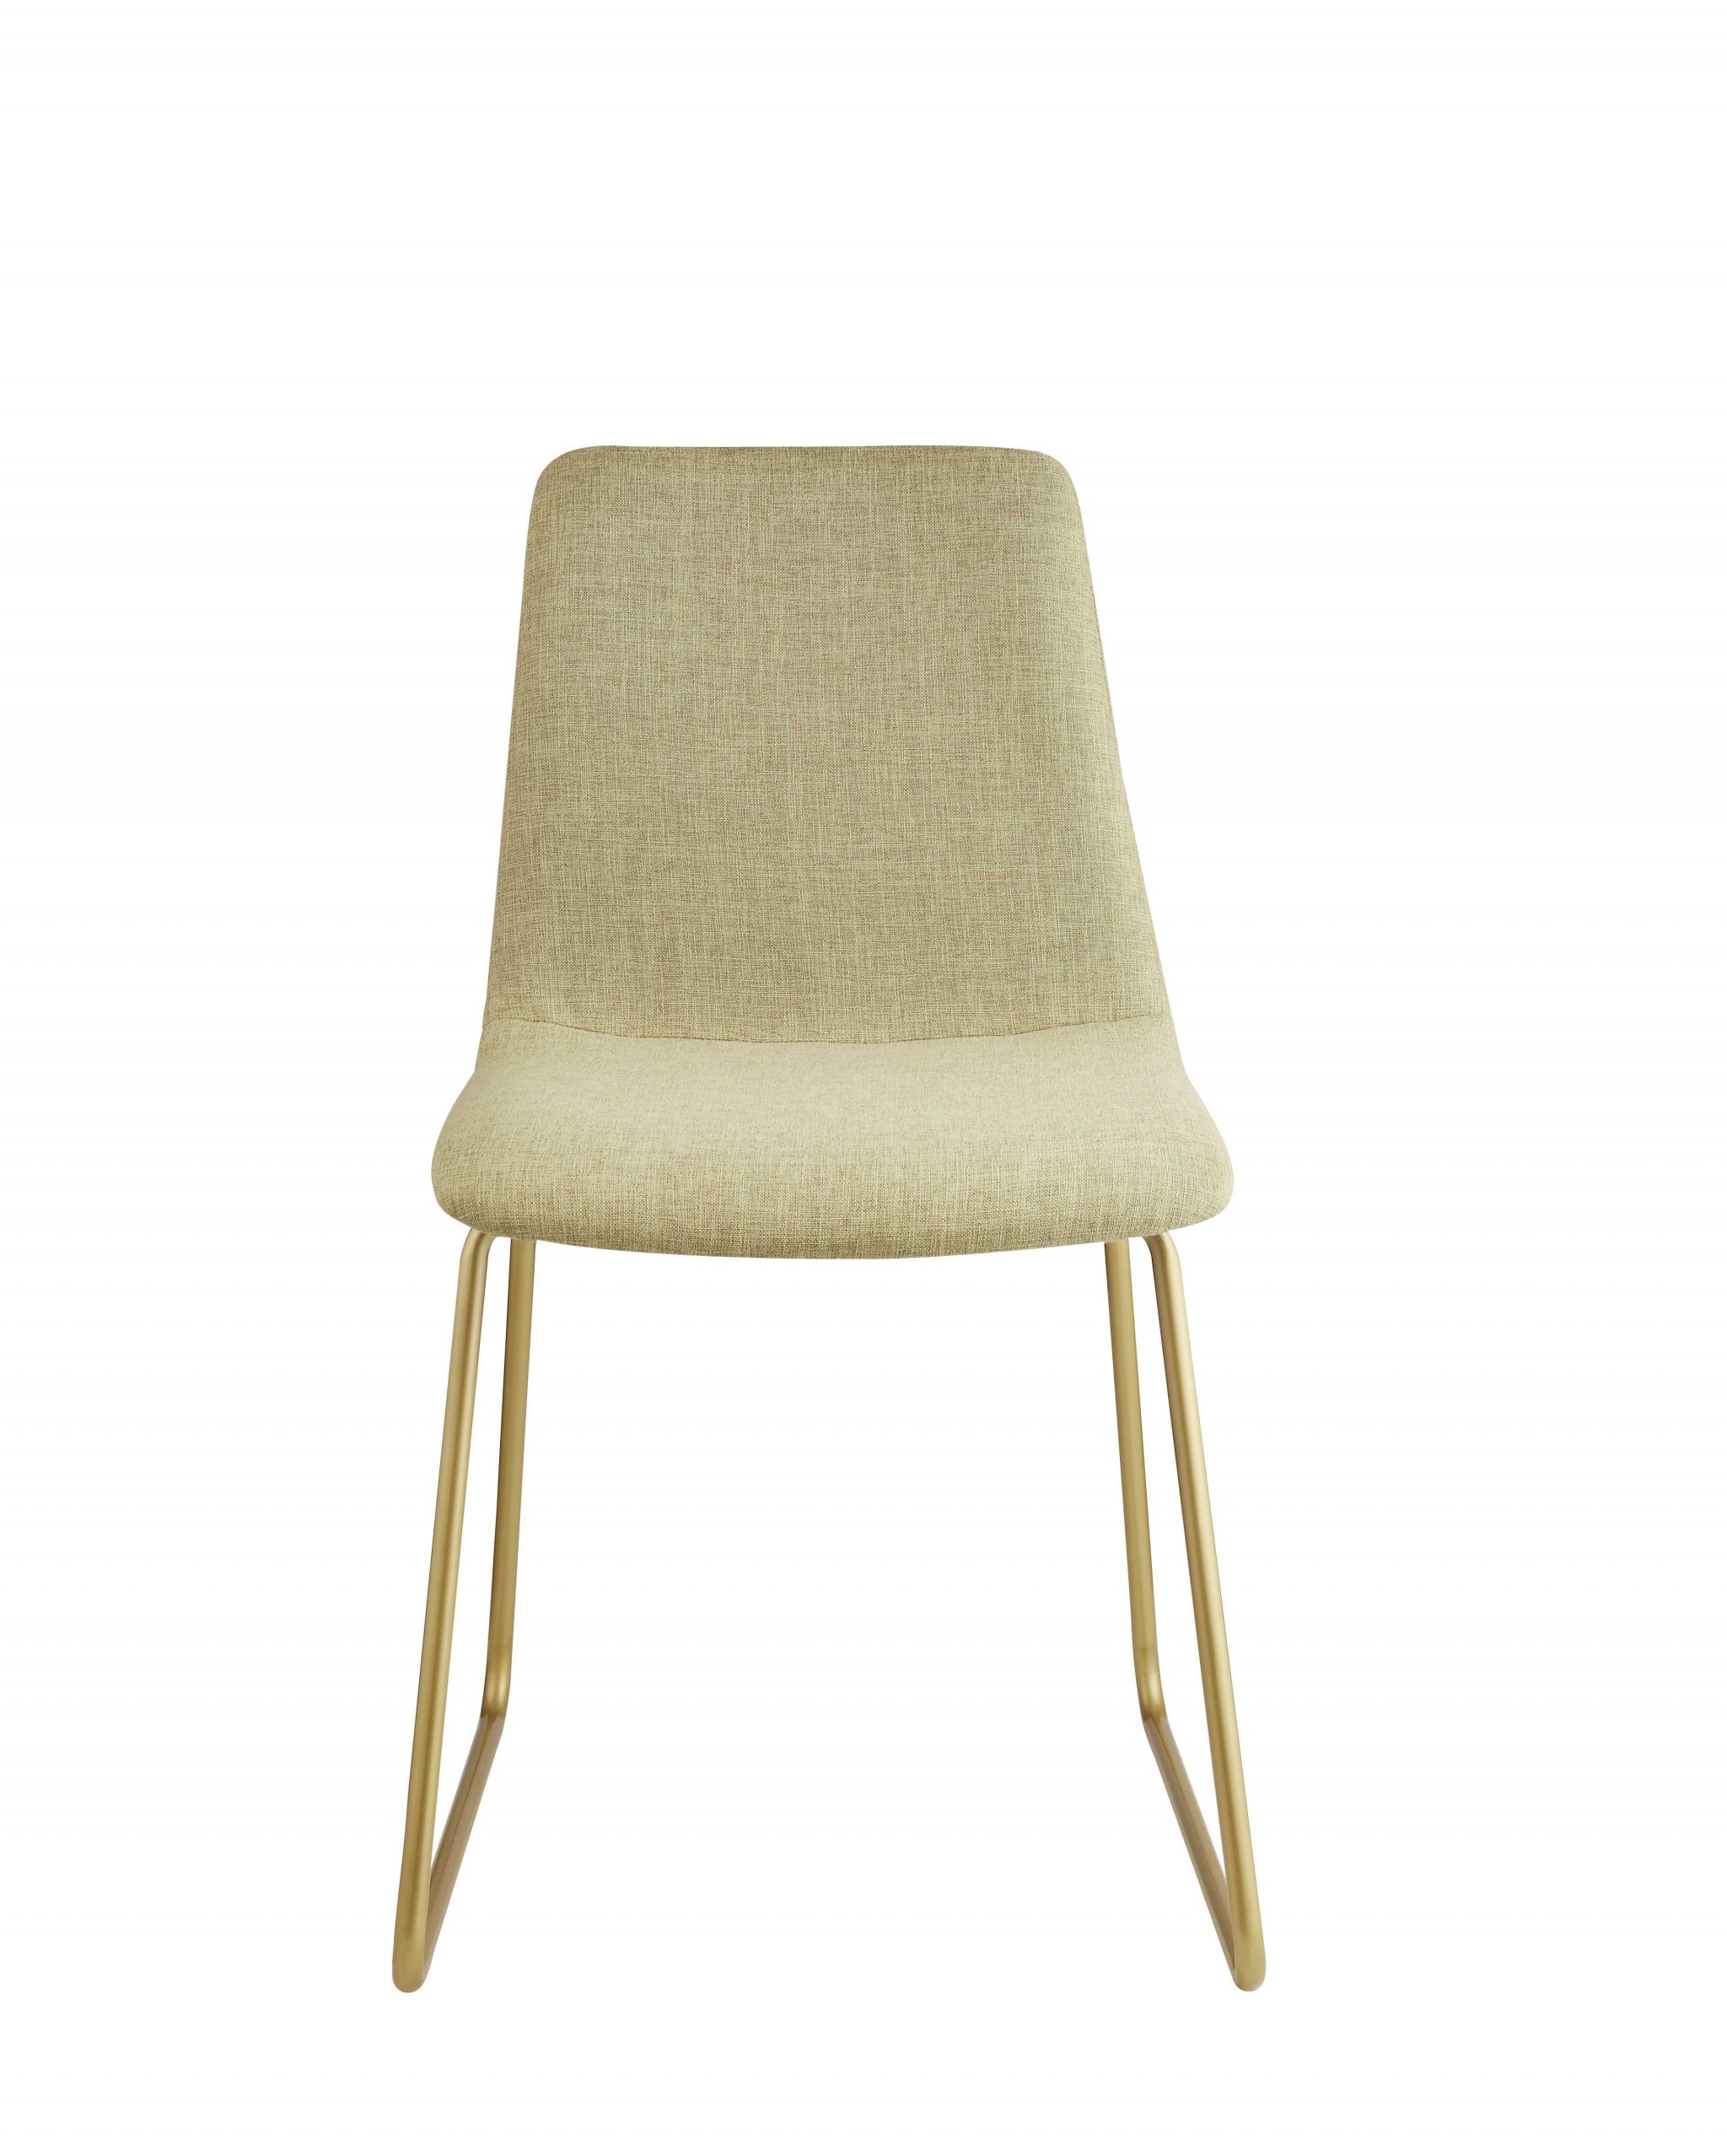 17" X 23" X 32" Light Green Fabric And Gold Accent Chair